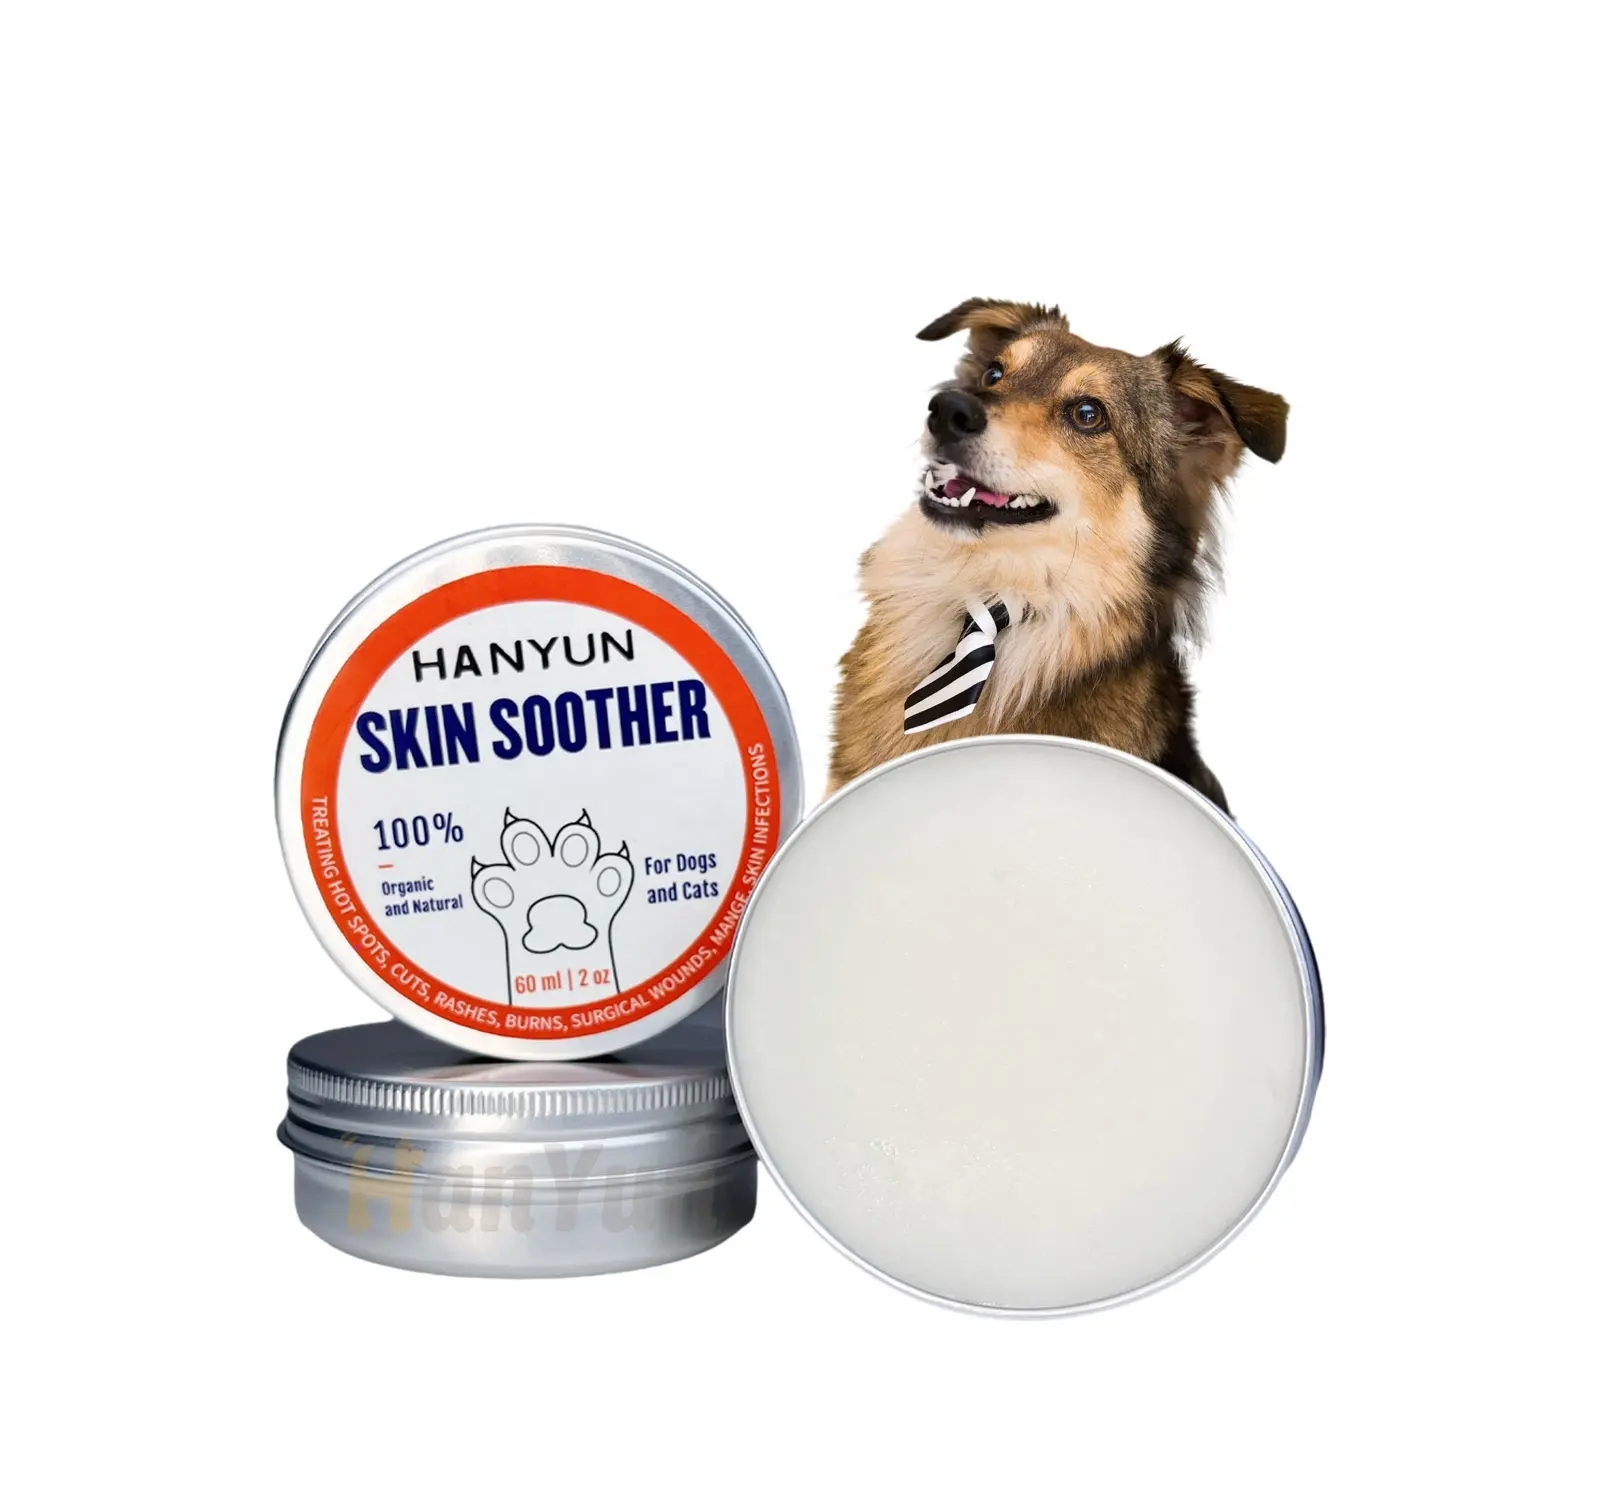 Hanyun Wholesale Natural Skin Soother balm Relief Allergy and Itch, Moisturize dry skin for Dogs with plant-based ingredients